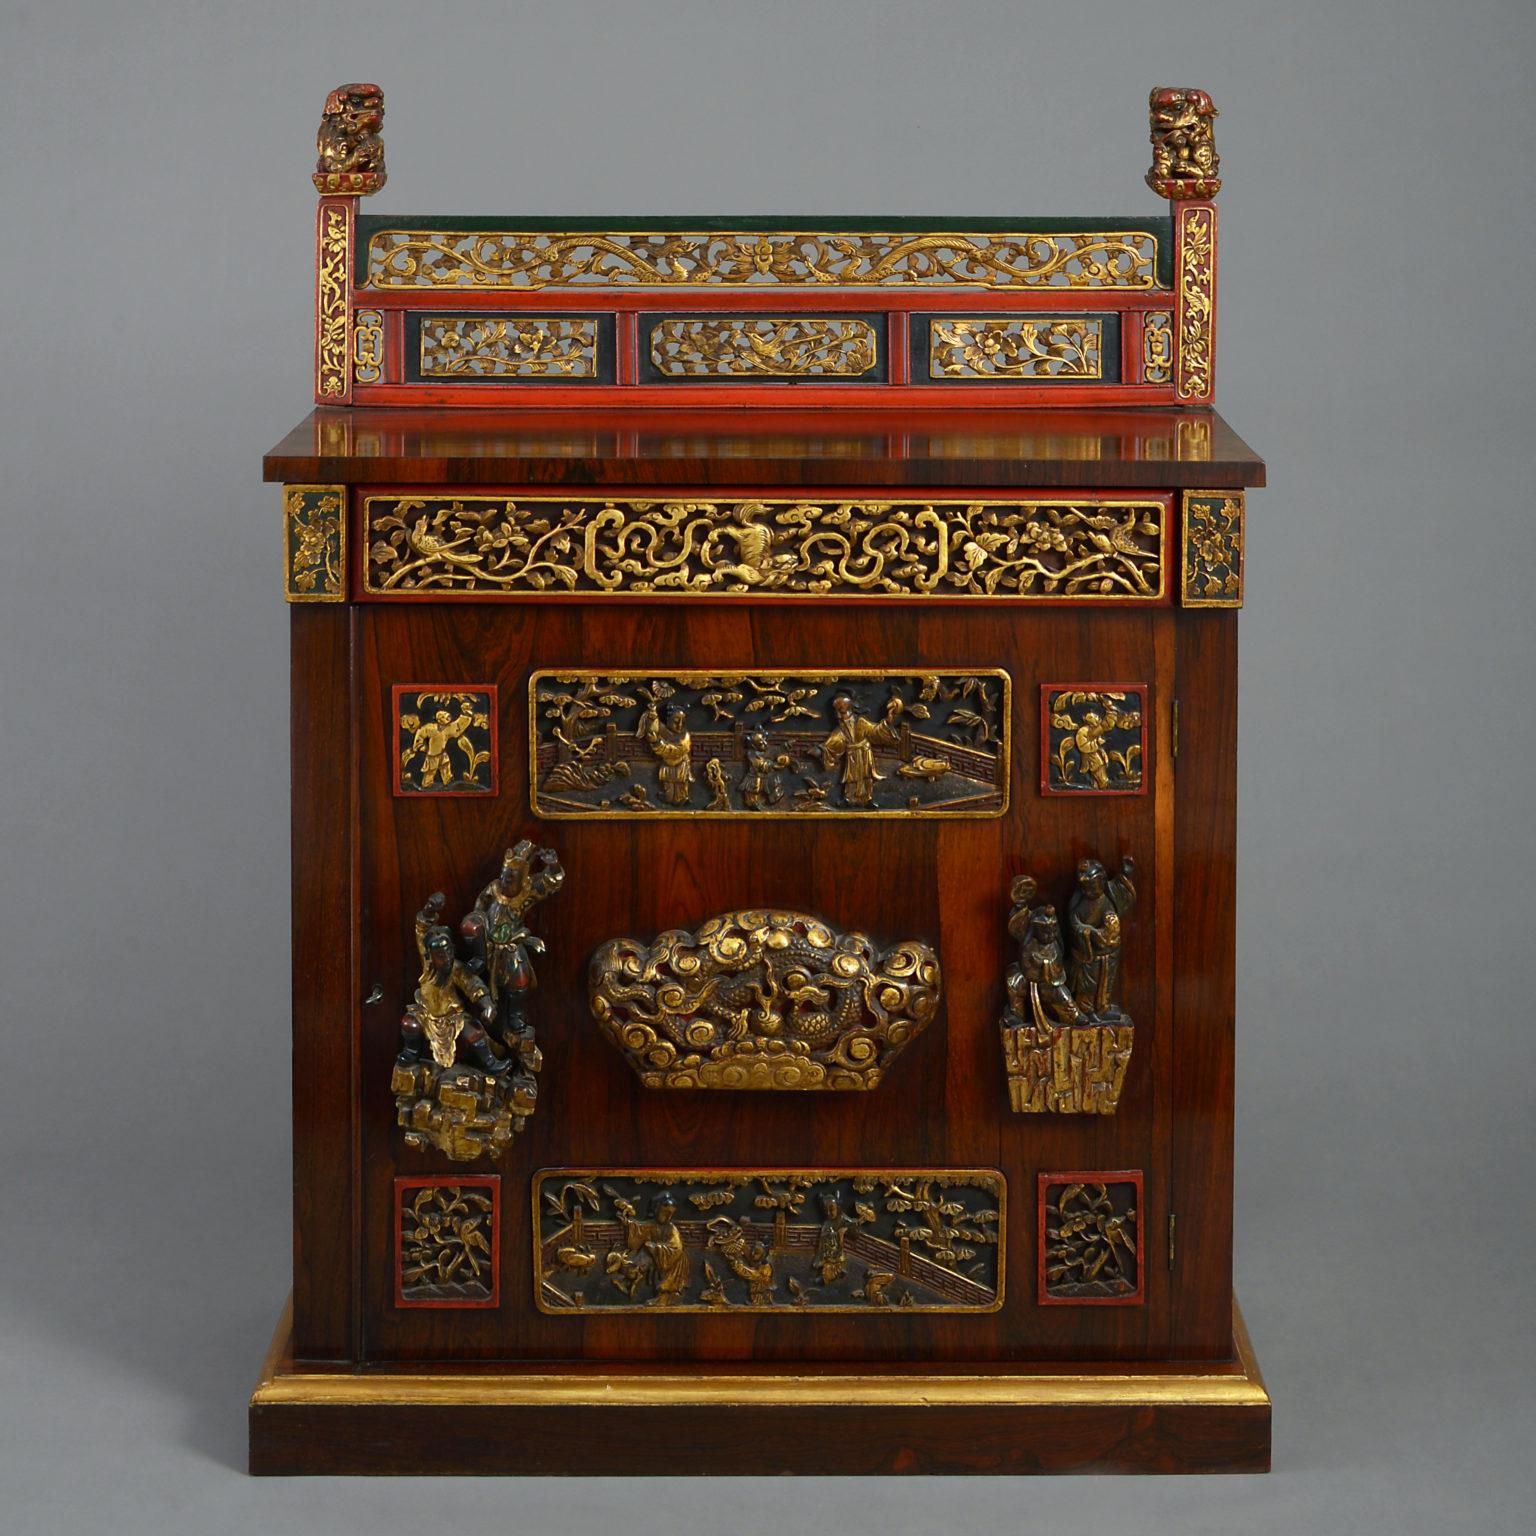 A William IV period rosewood cabinet, having a Chinese carved and painted parcel-gilt gallery and applied parcel gilt panels with a frieze drawer and the door enclosing a shelf.

Provenance: Miles Stapleton, 8th Lord Beaumont (1805-1854), thence